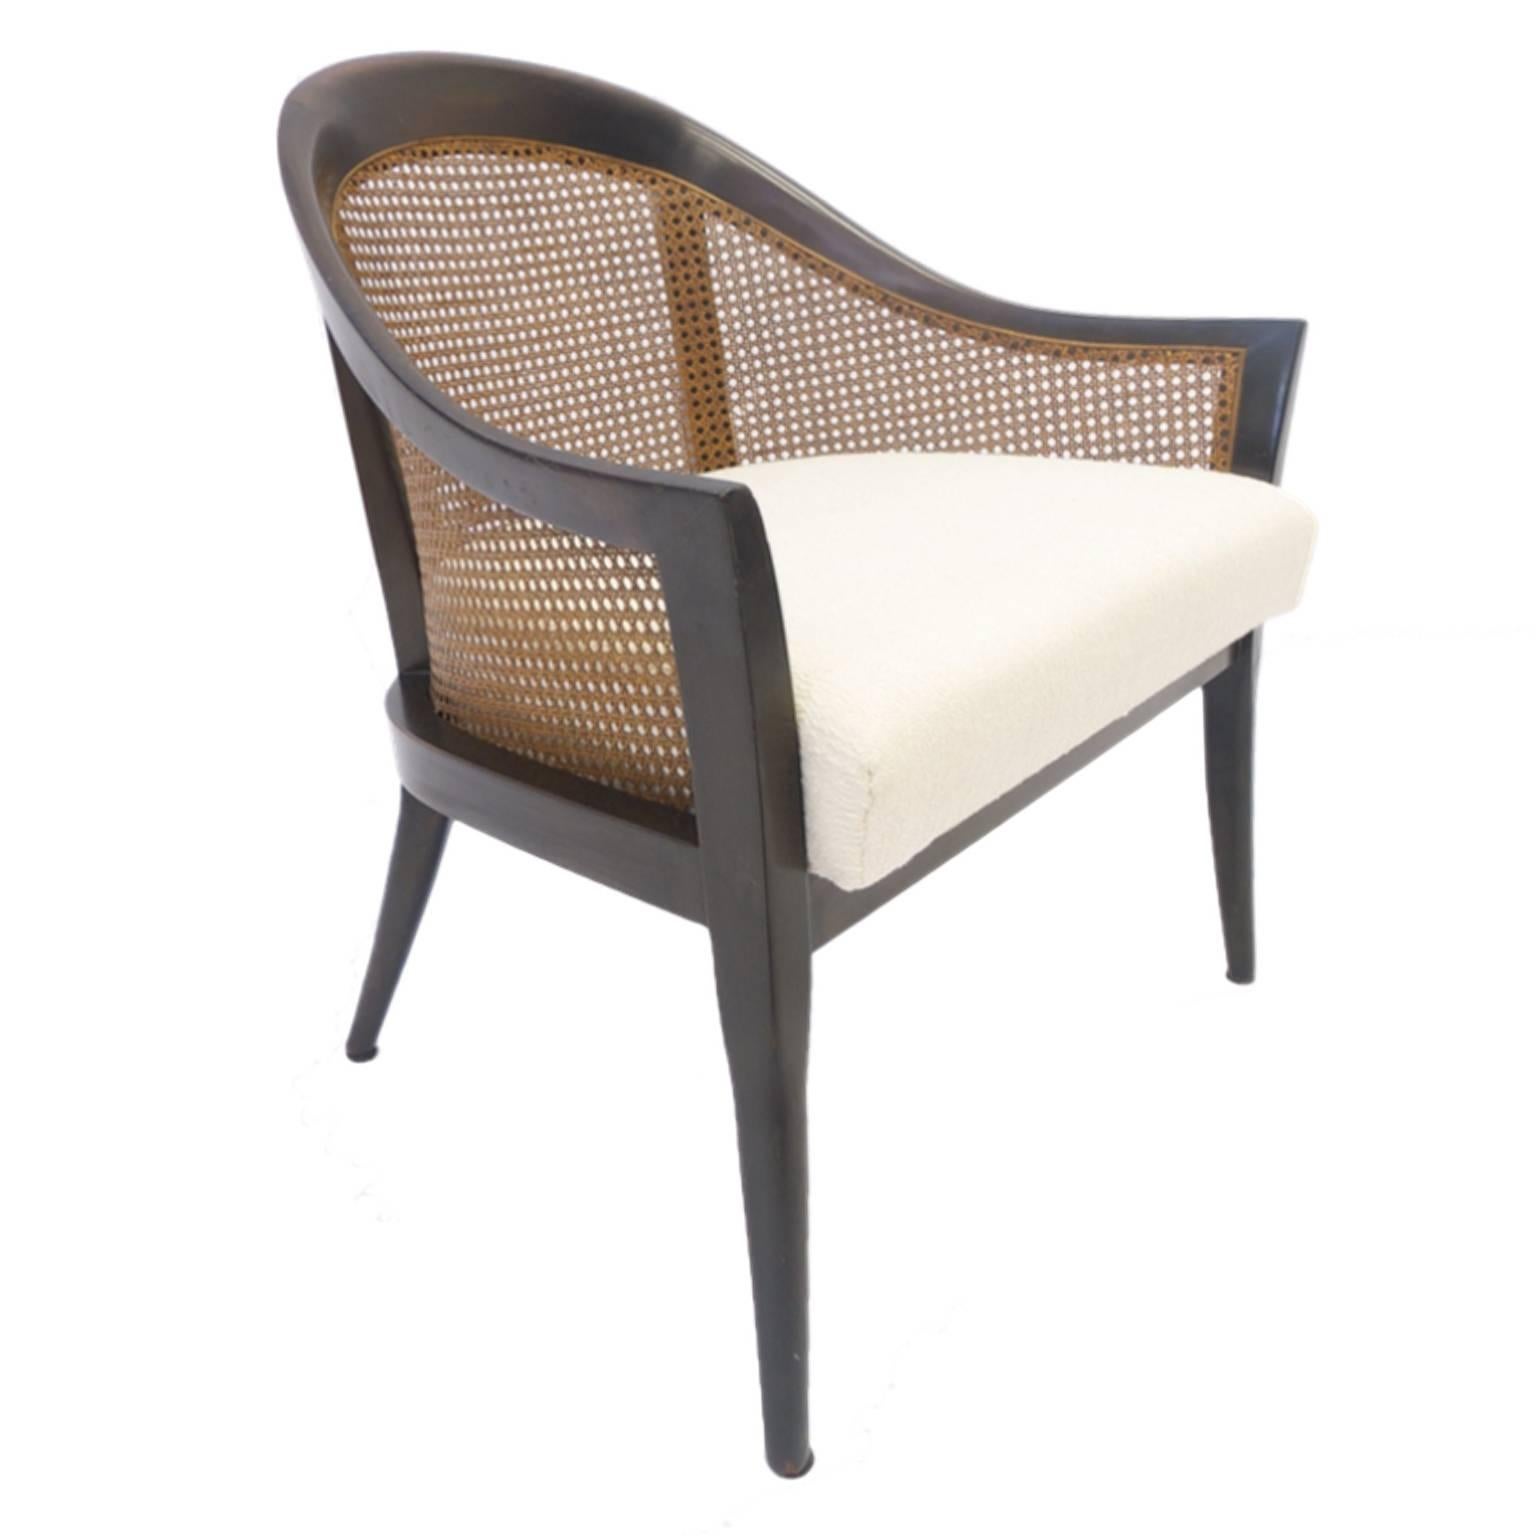 Beautiful Harvey Probber chair. Stained mahogany frame. Freshly upholstered cream colored upholstery. Beautifully caned back. Available is this single chair as well as a pair that is listed separately.